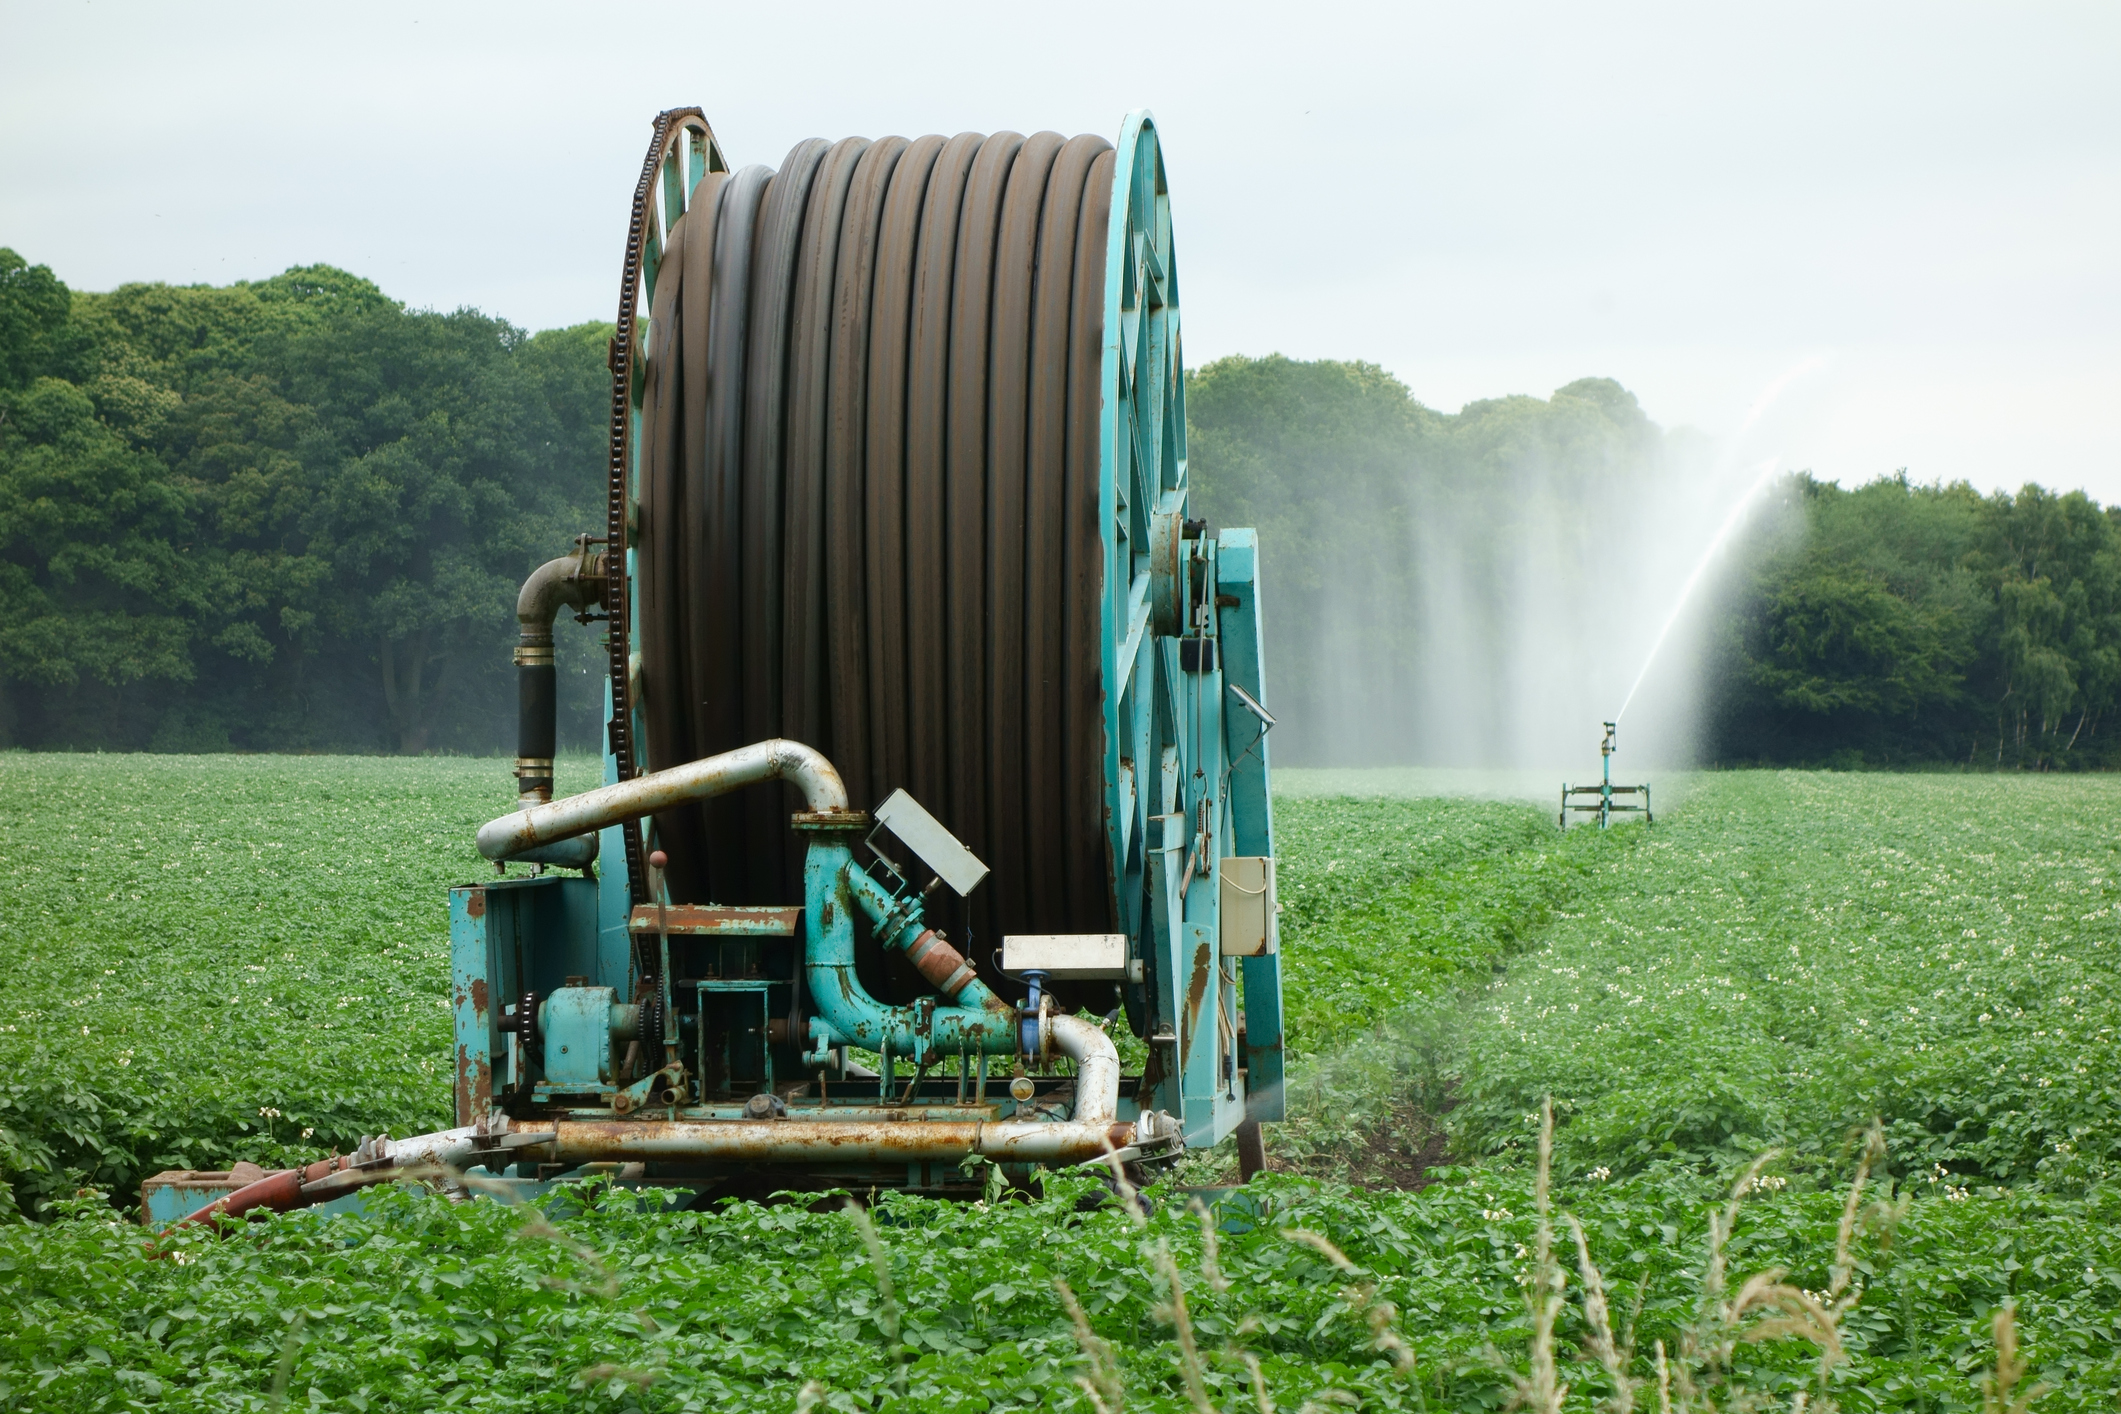 Irrigators were widely used on potato crops last summer.